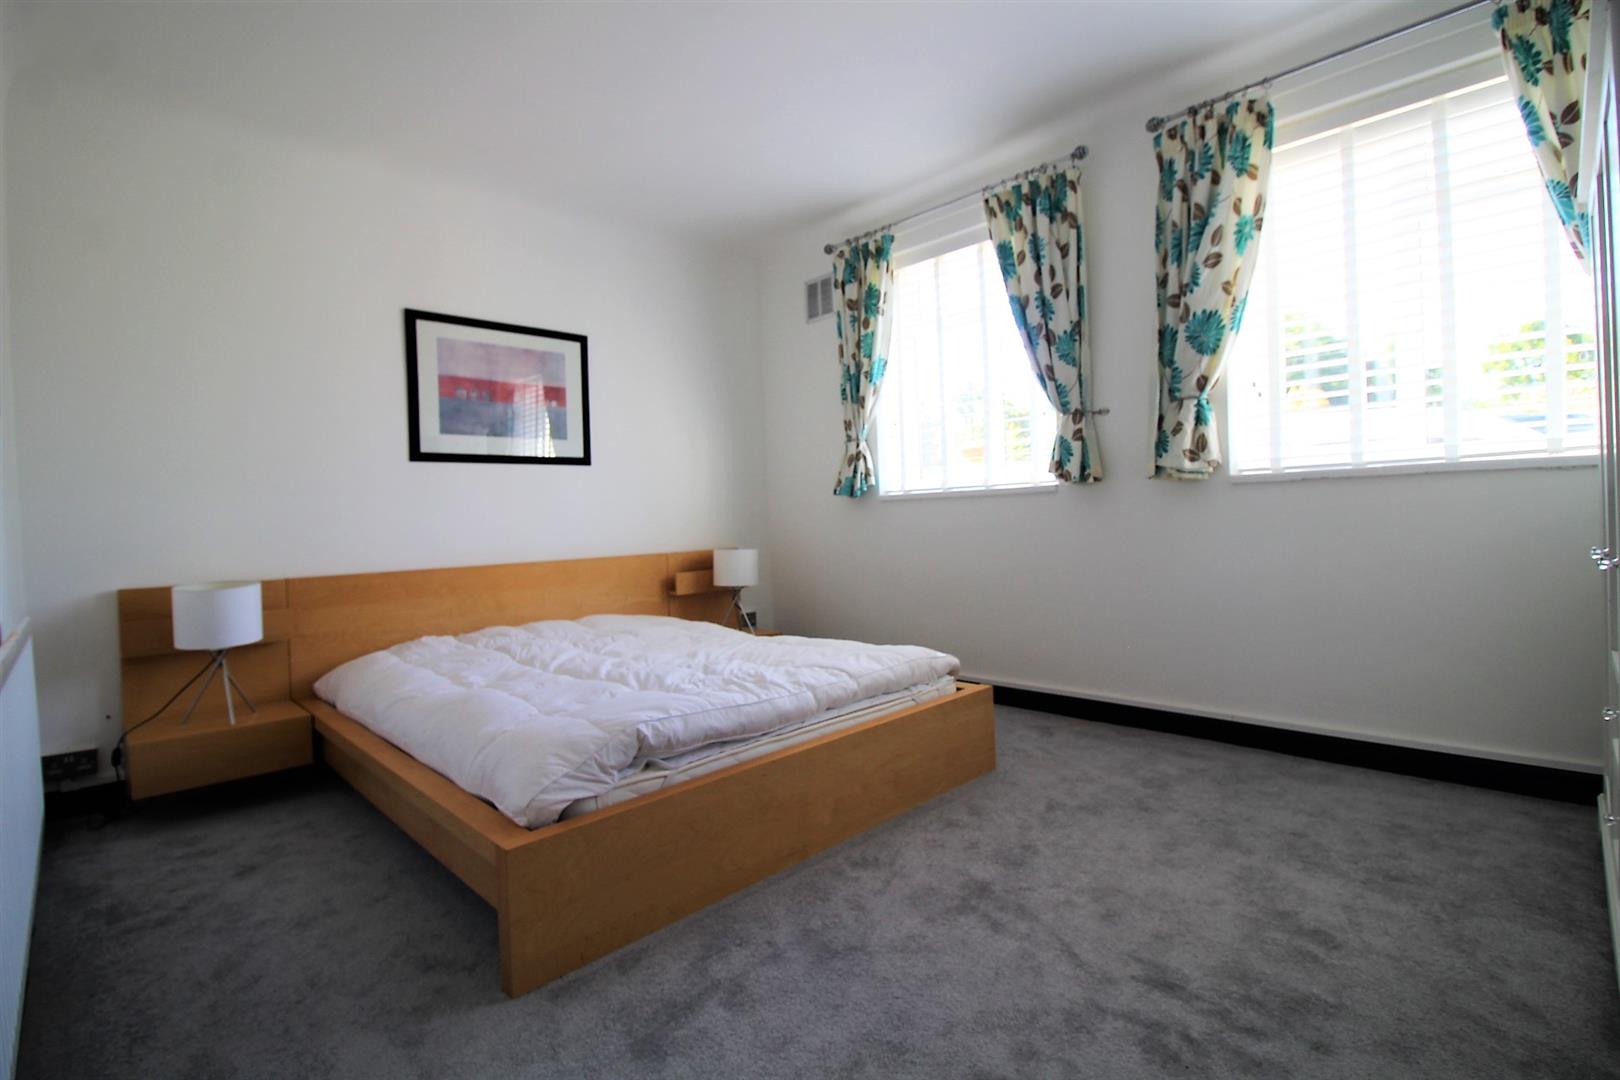 flat for rent palmerston road